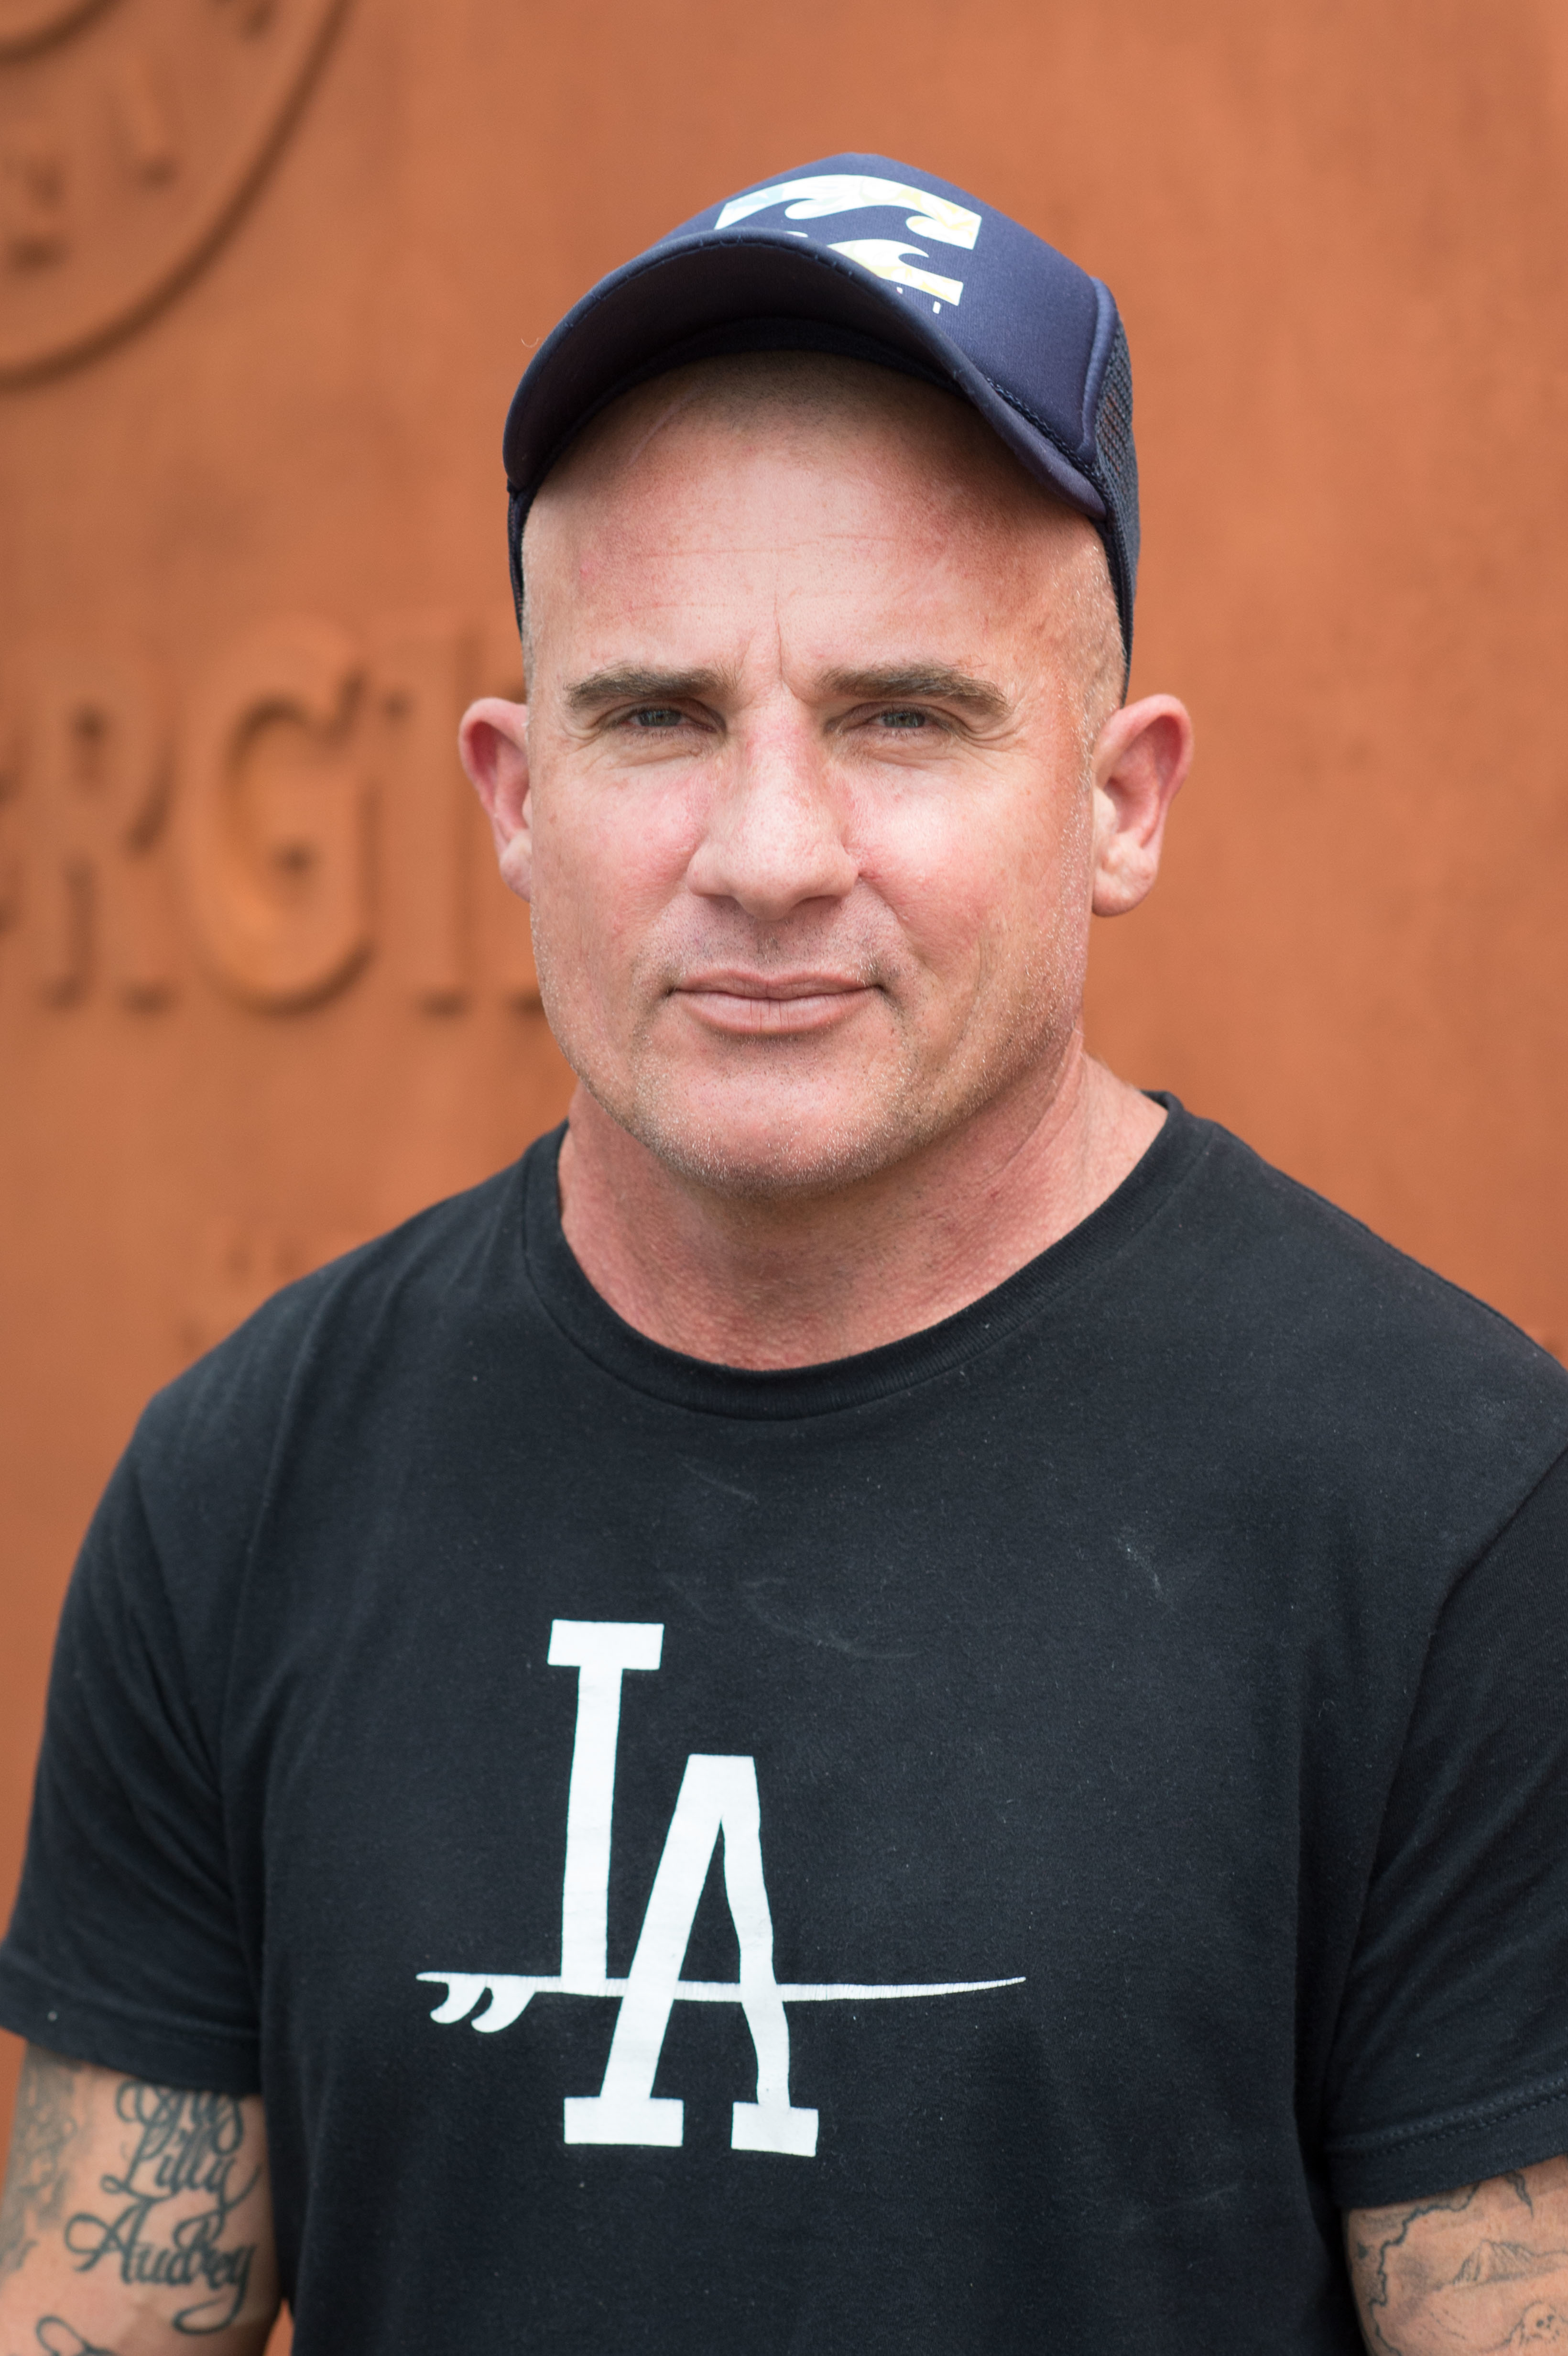 Man in LA cap and black t-shirt with visible tattoos standing in front of a wall